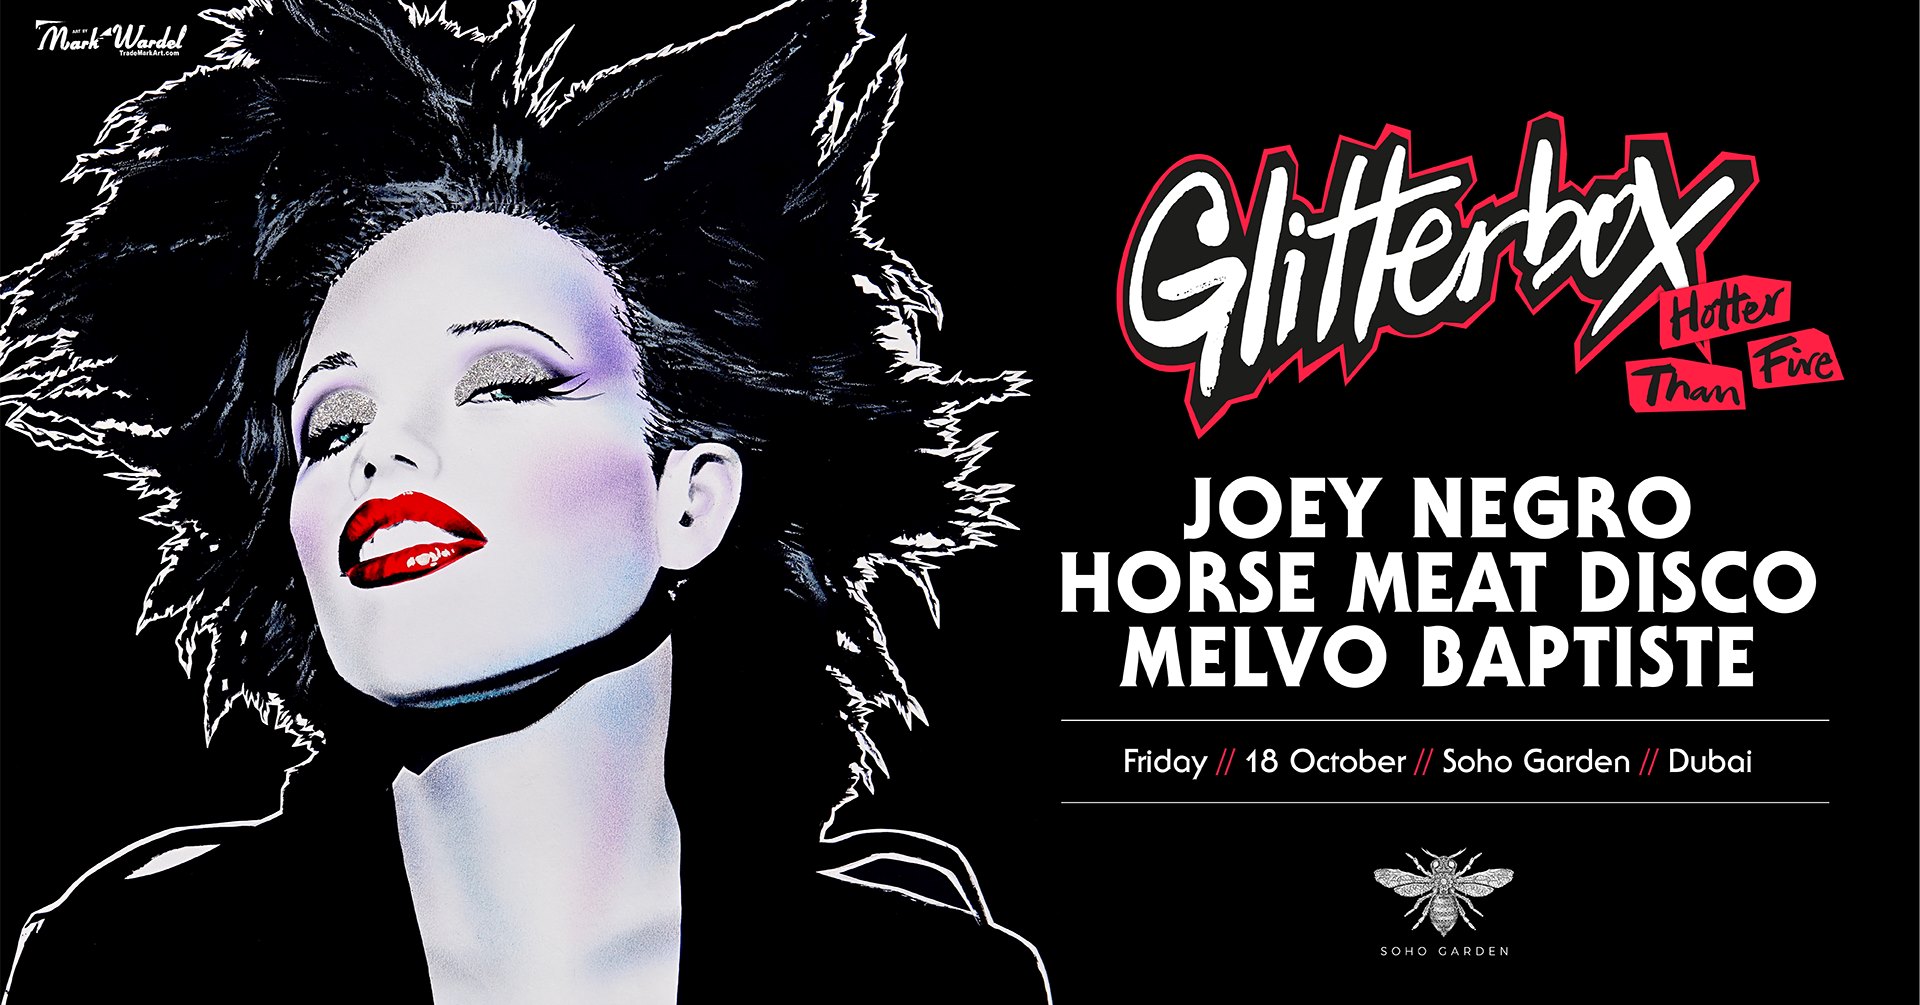 Glitterbox Ibiza party - Coming Soon in UAE